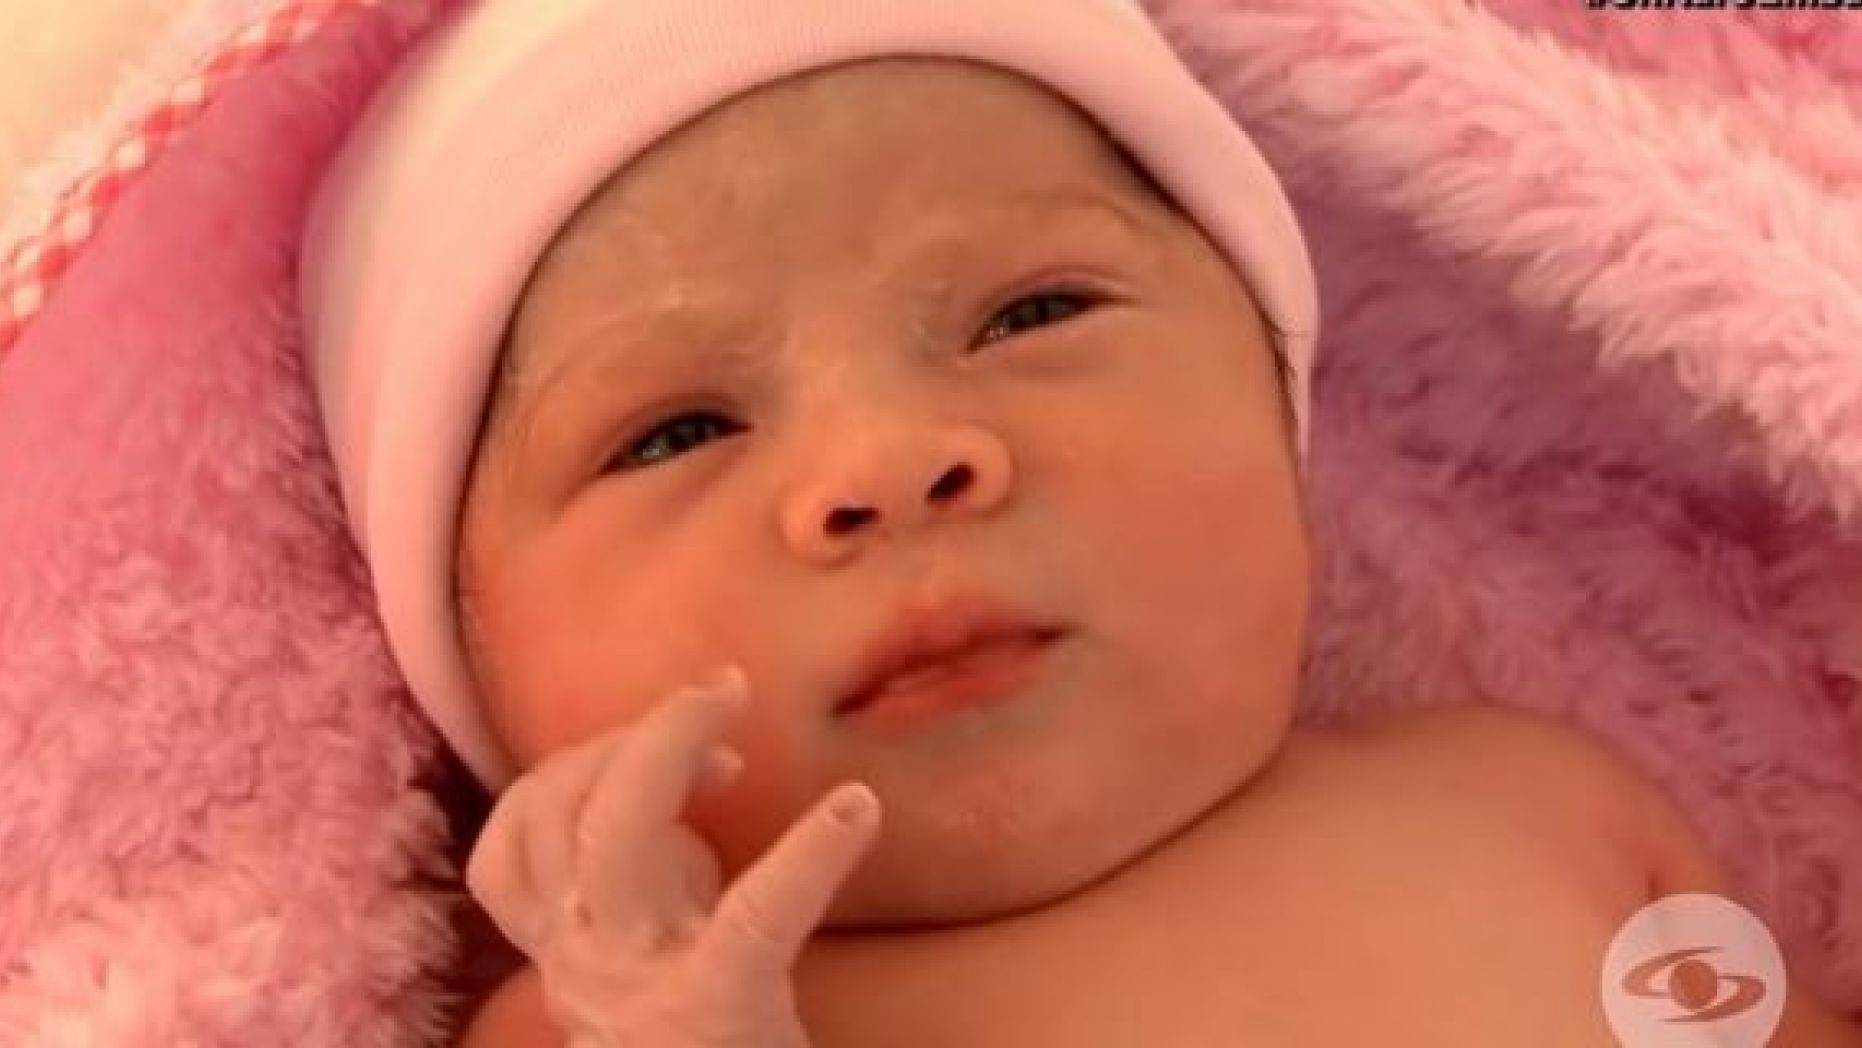 Baby Girl Is Born 'Pregnant' - Has To Have C-Section So Doctors Can ...